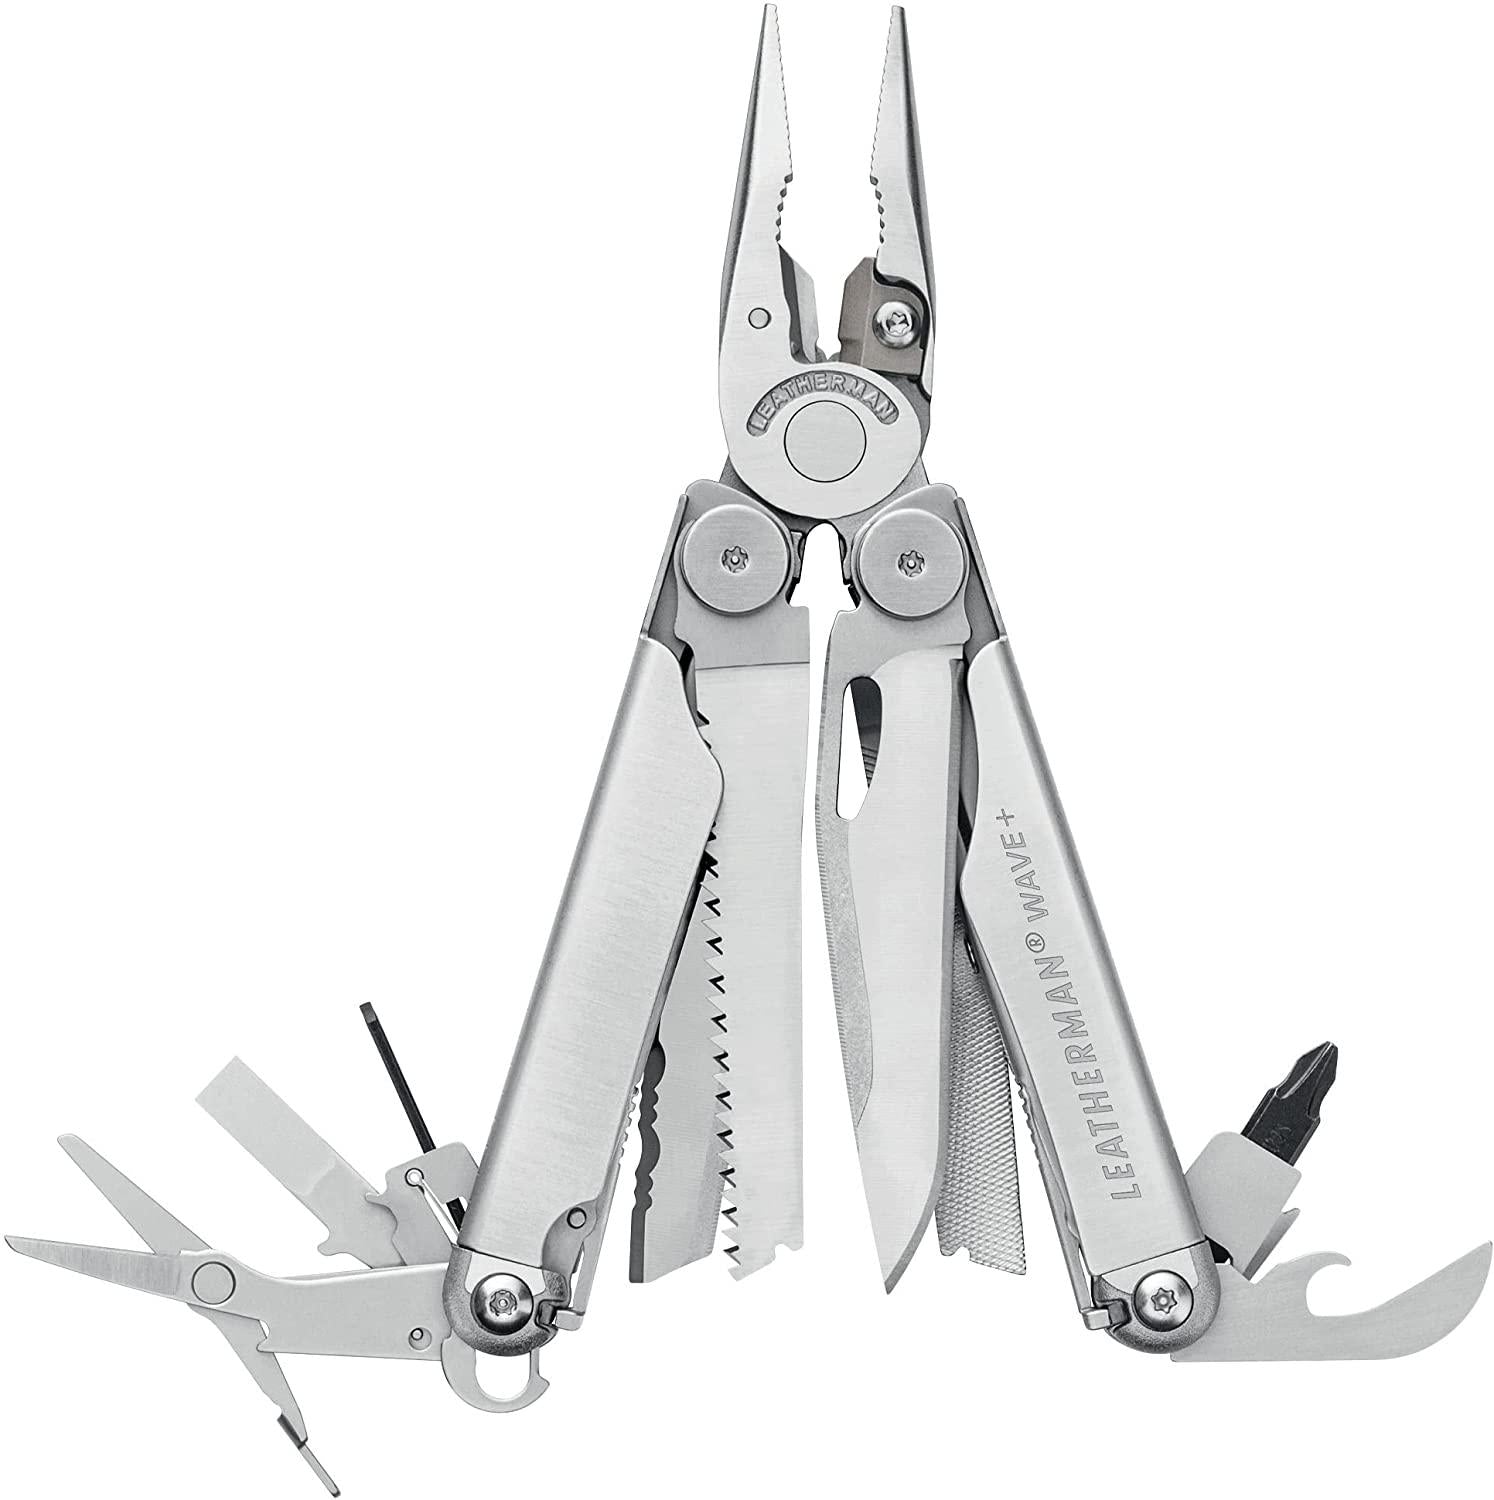 Leatherman, LEATHERMAN, Wave Plus Multitool with Premium Replaceable Wire Cutters, Spring-Action Scissors and Nylon Sheath, Built in the USA, Stainless Steel